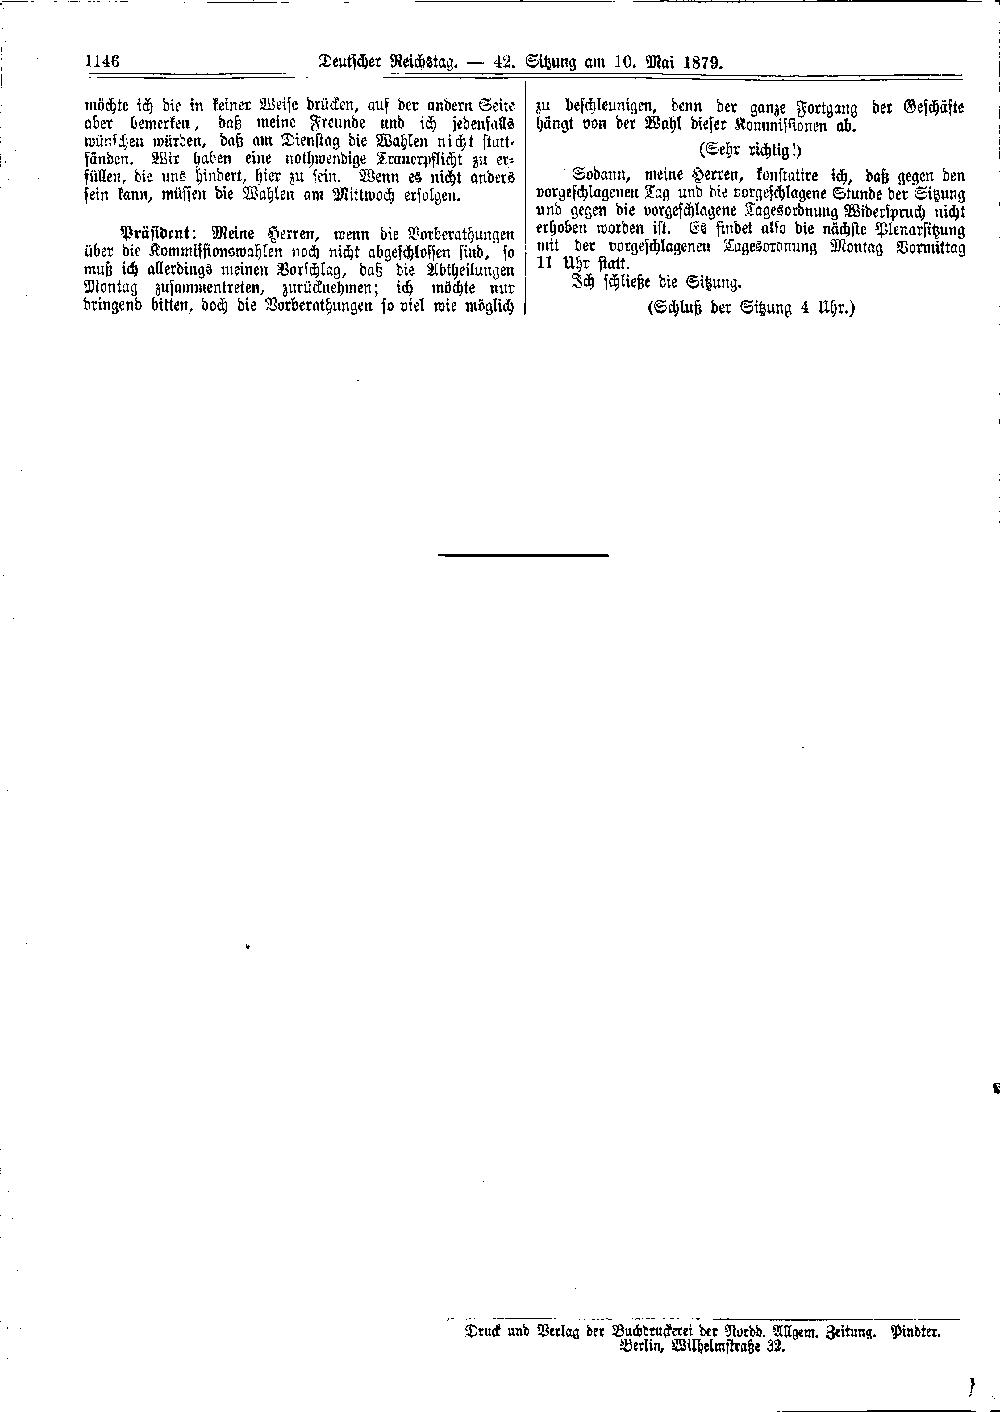 Scan of page 1146